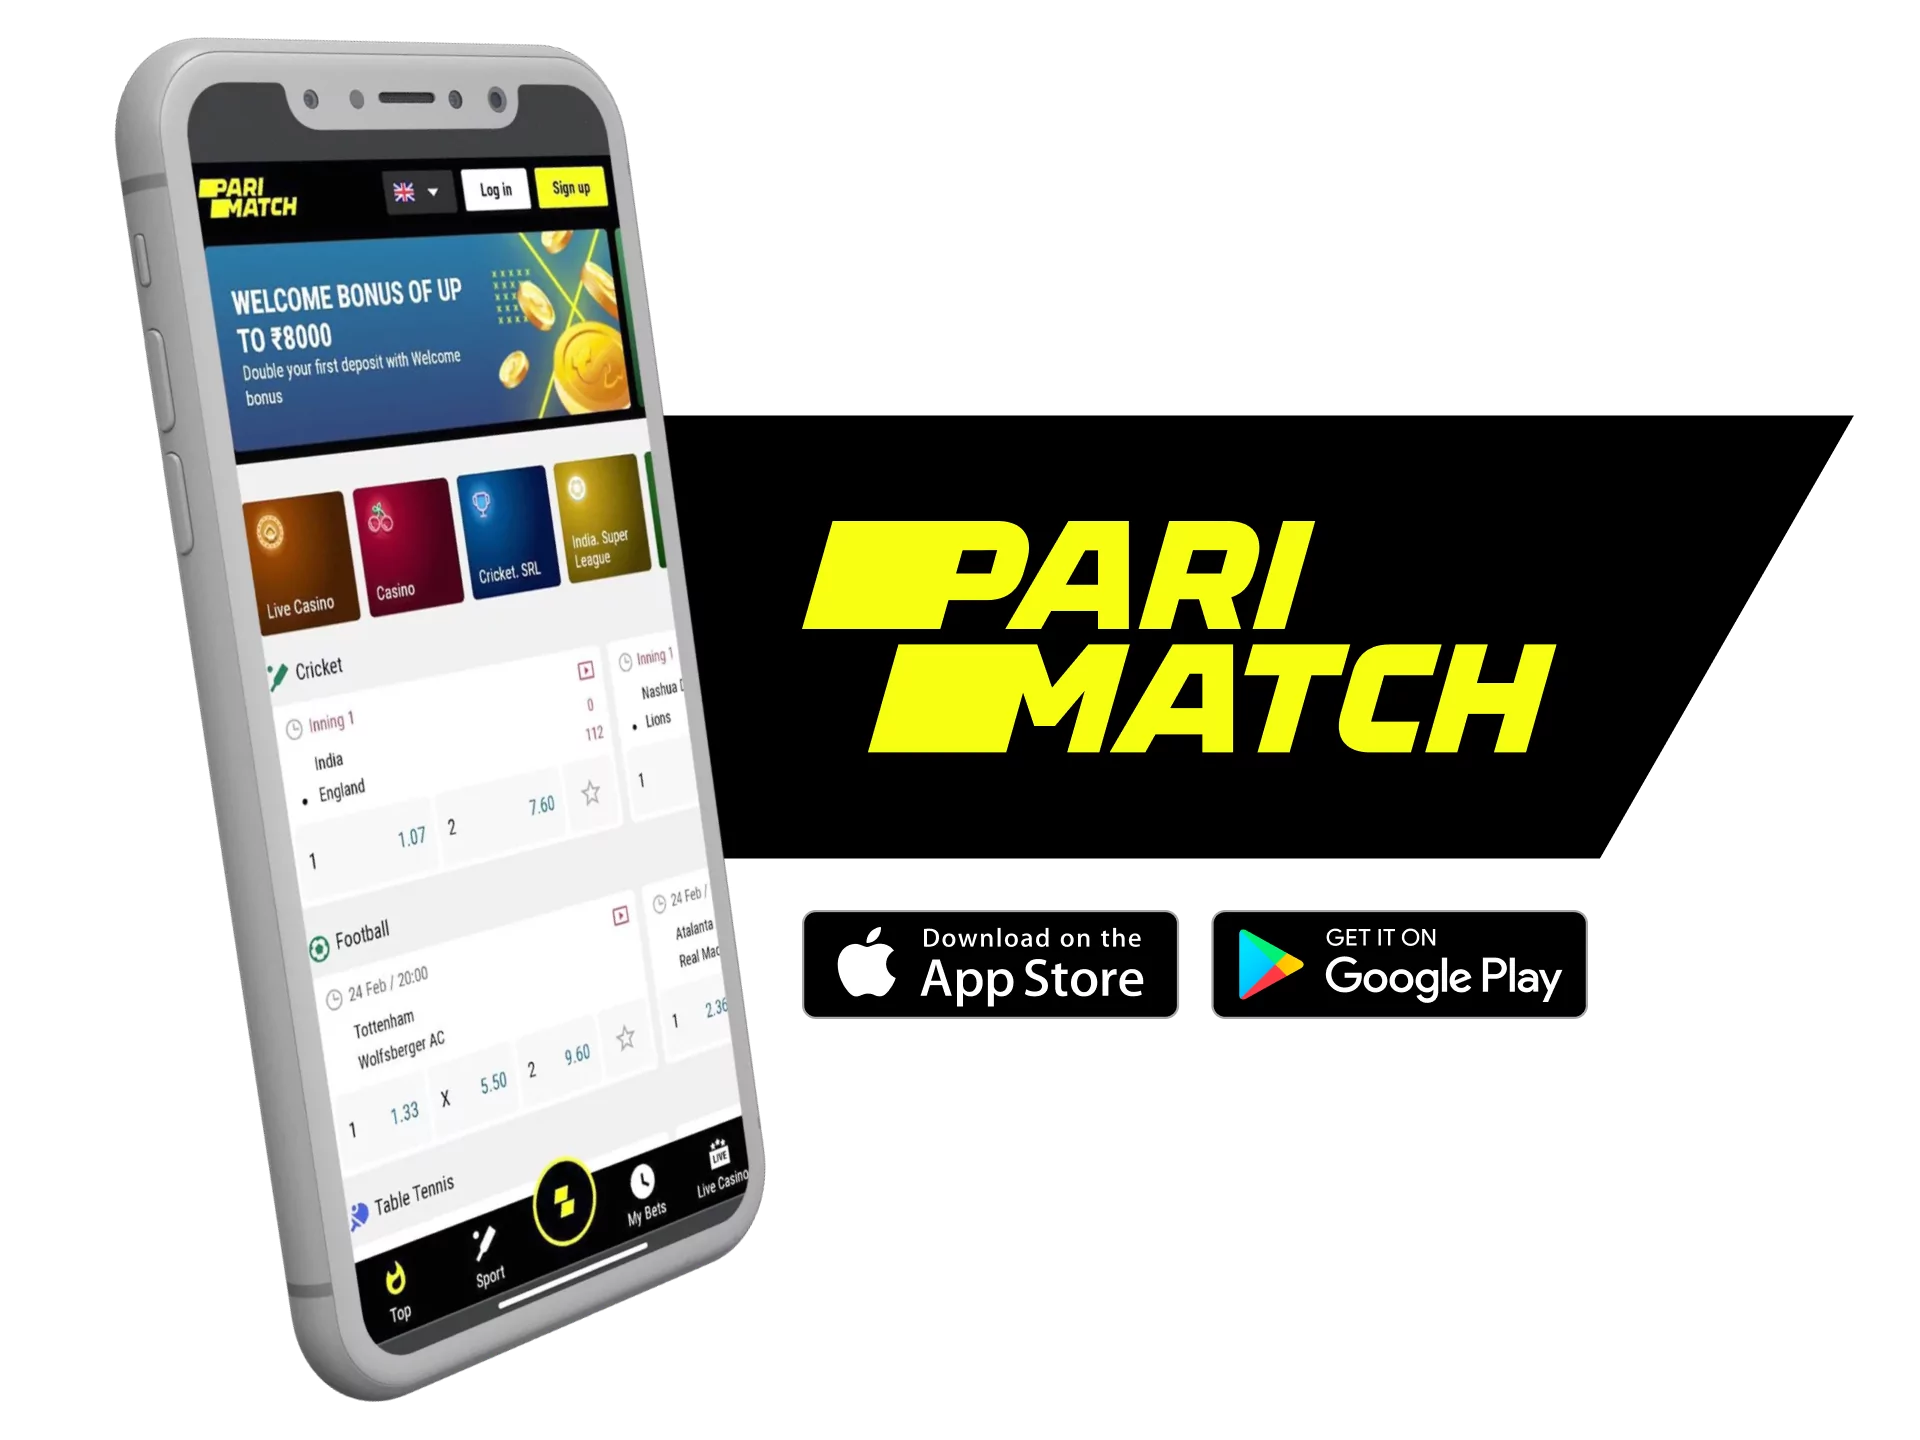 Parimatch of one of the most recognisable brands in the betting industry and has a customer base of over 1 million bettors.